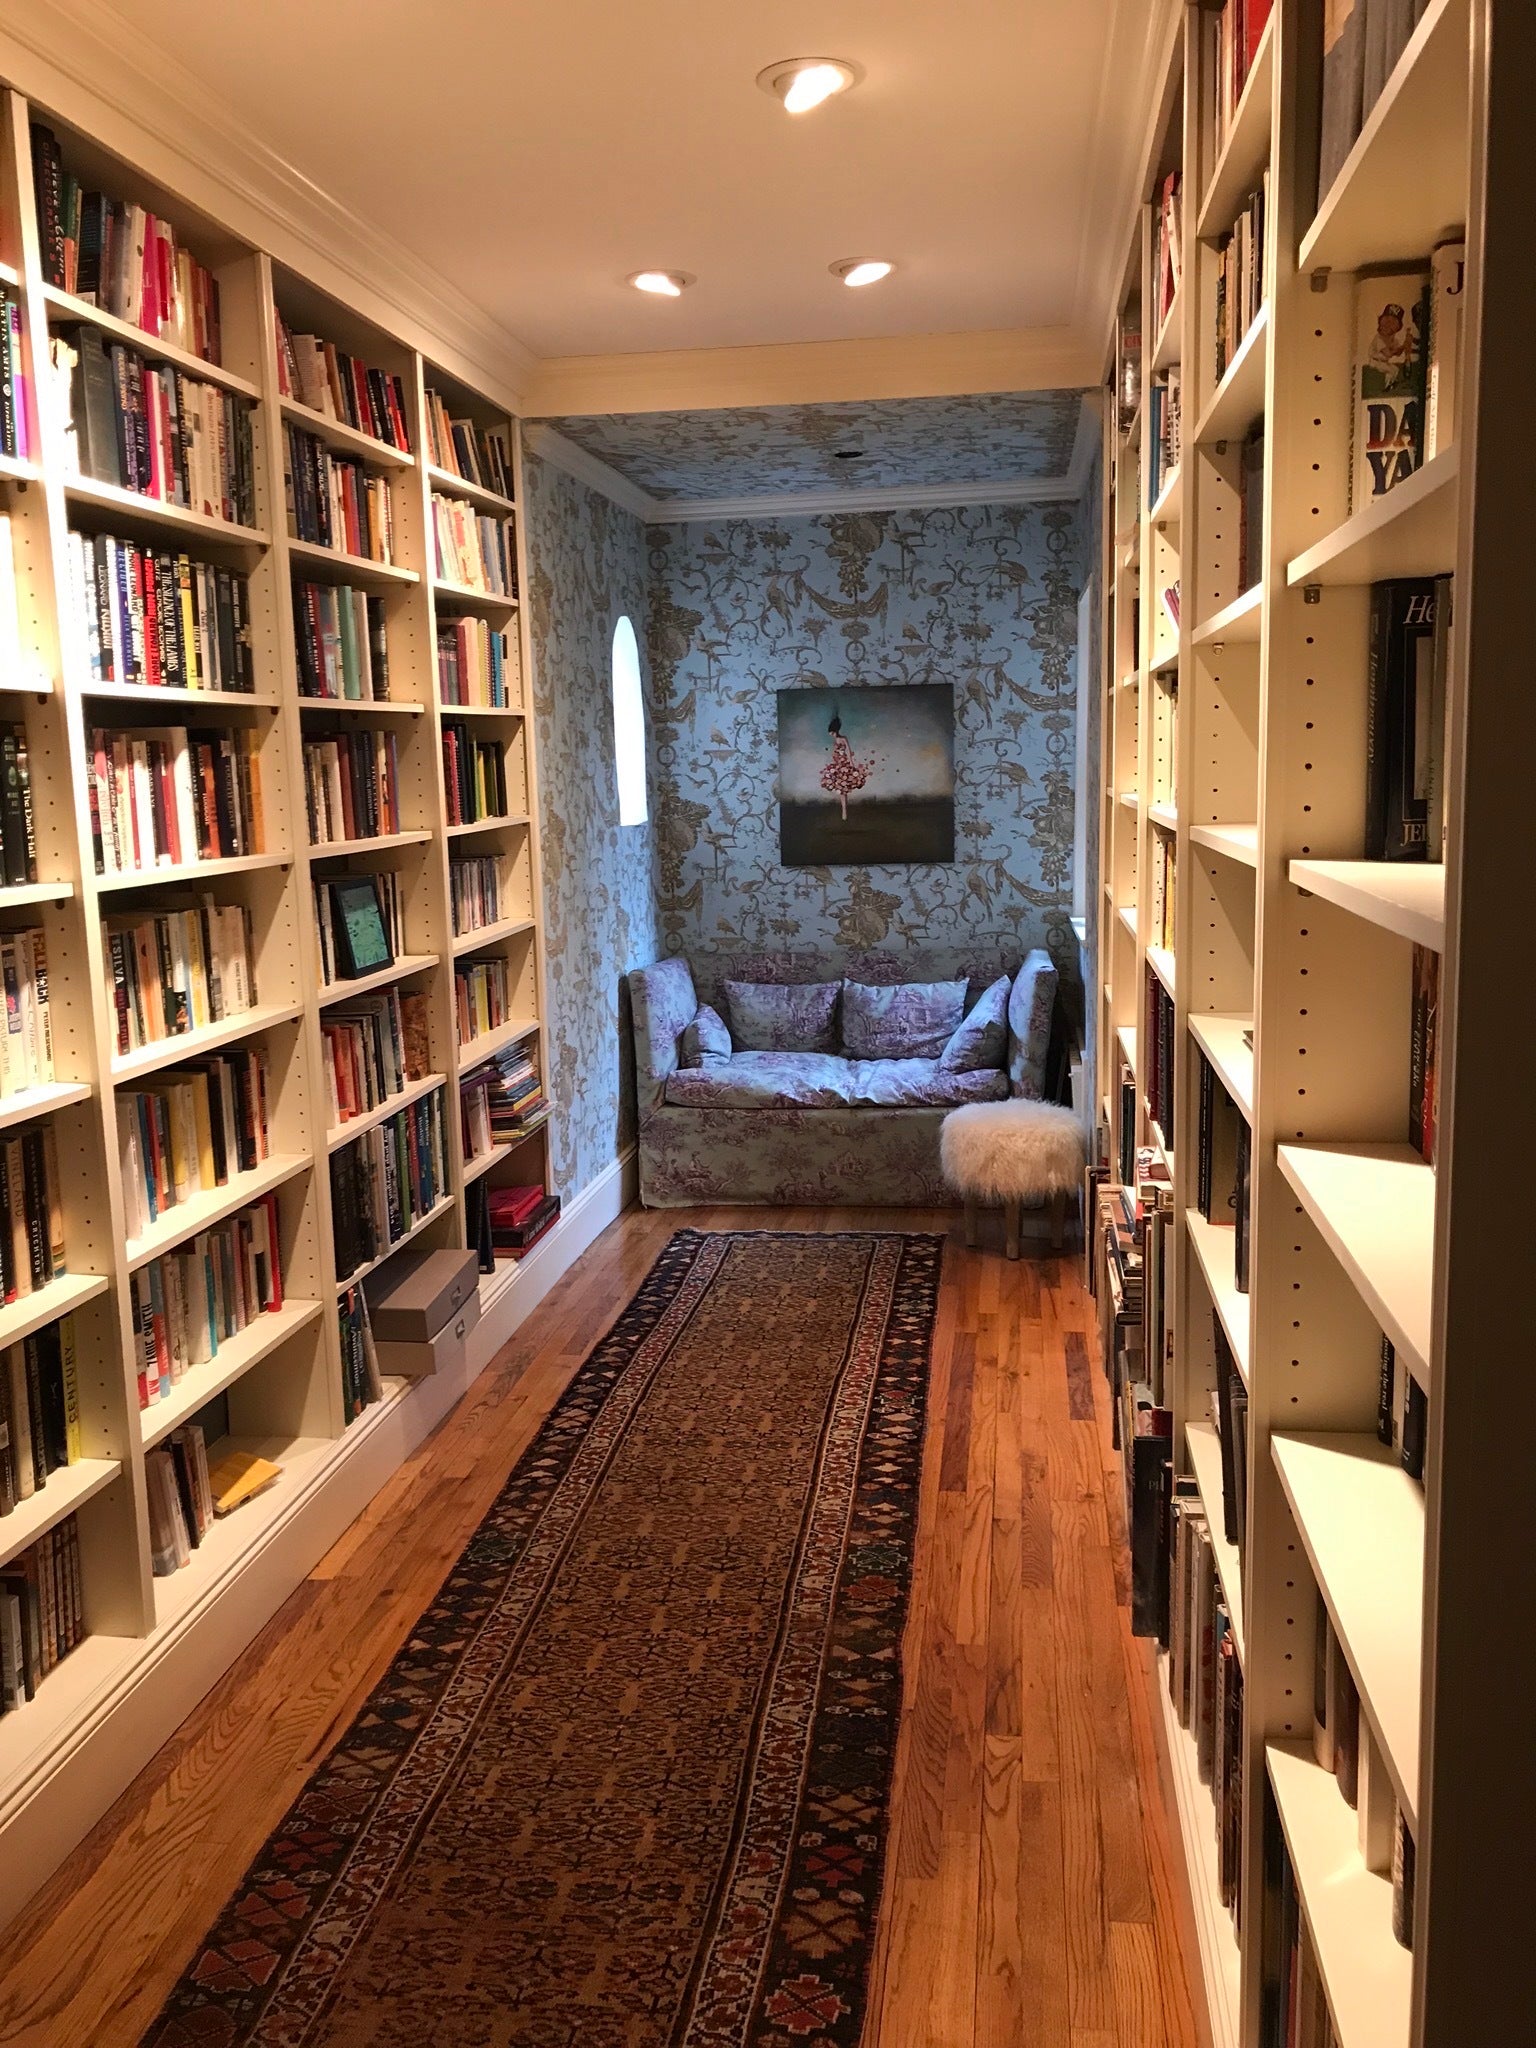 Hallway with bookshelves and floral blue wallpaper